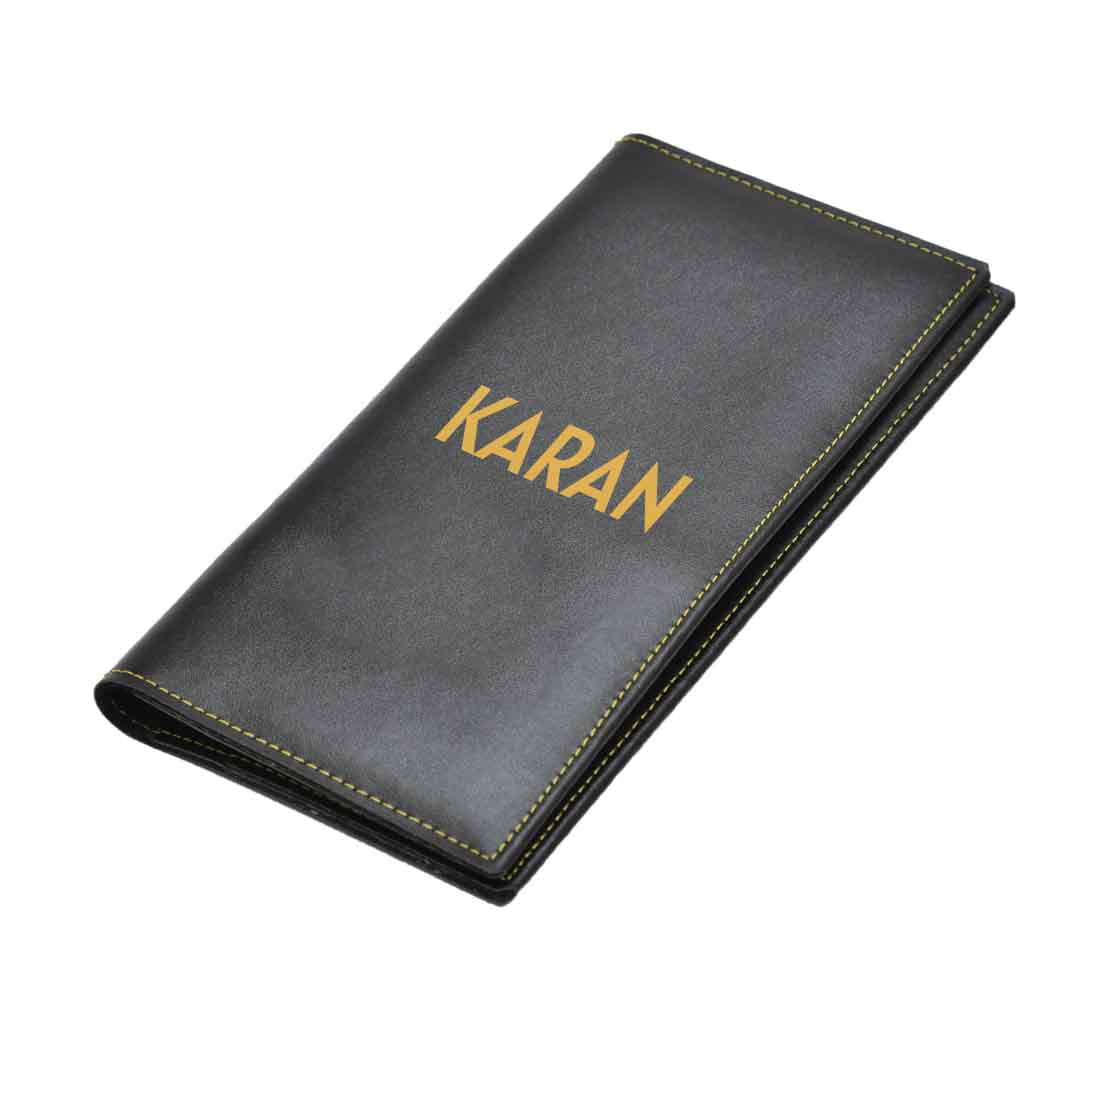 Personalized Passport Wallet for Travel Organiser - Add Name